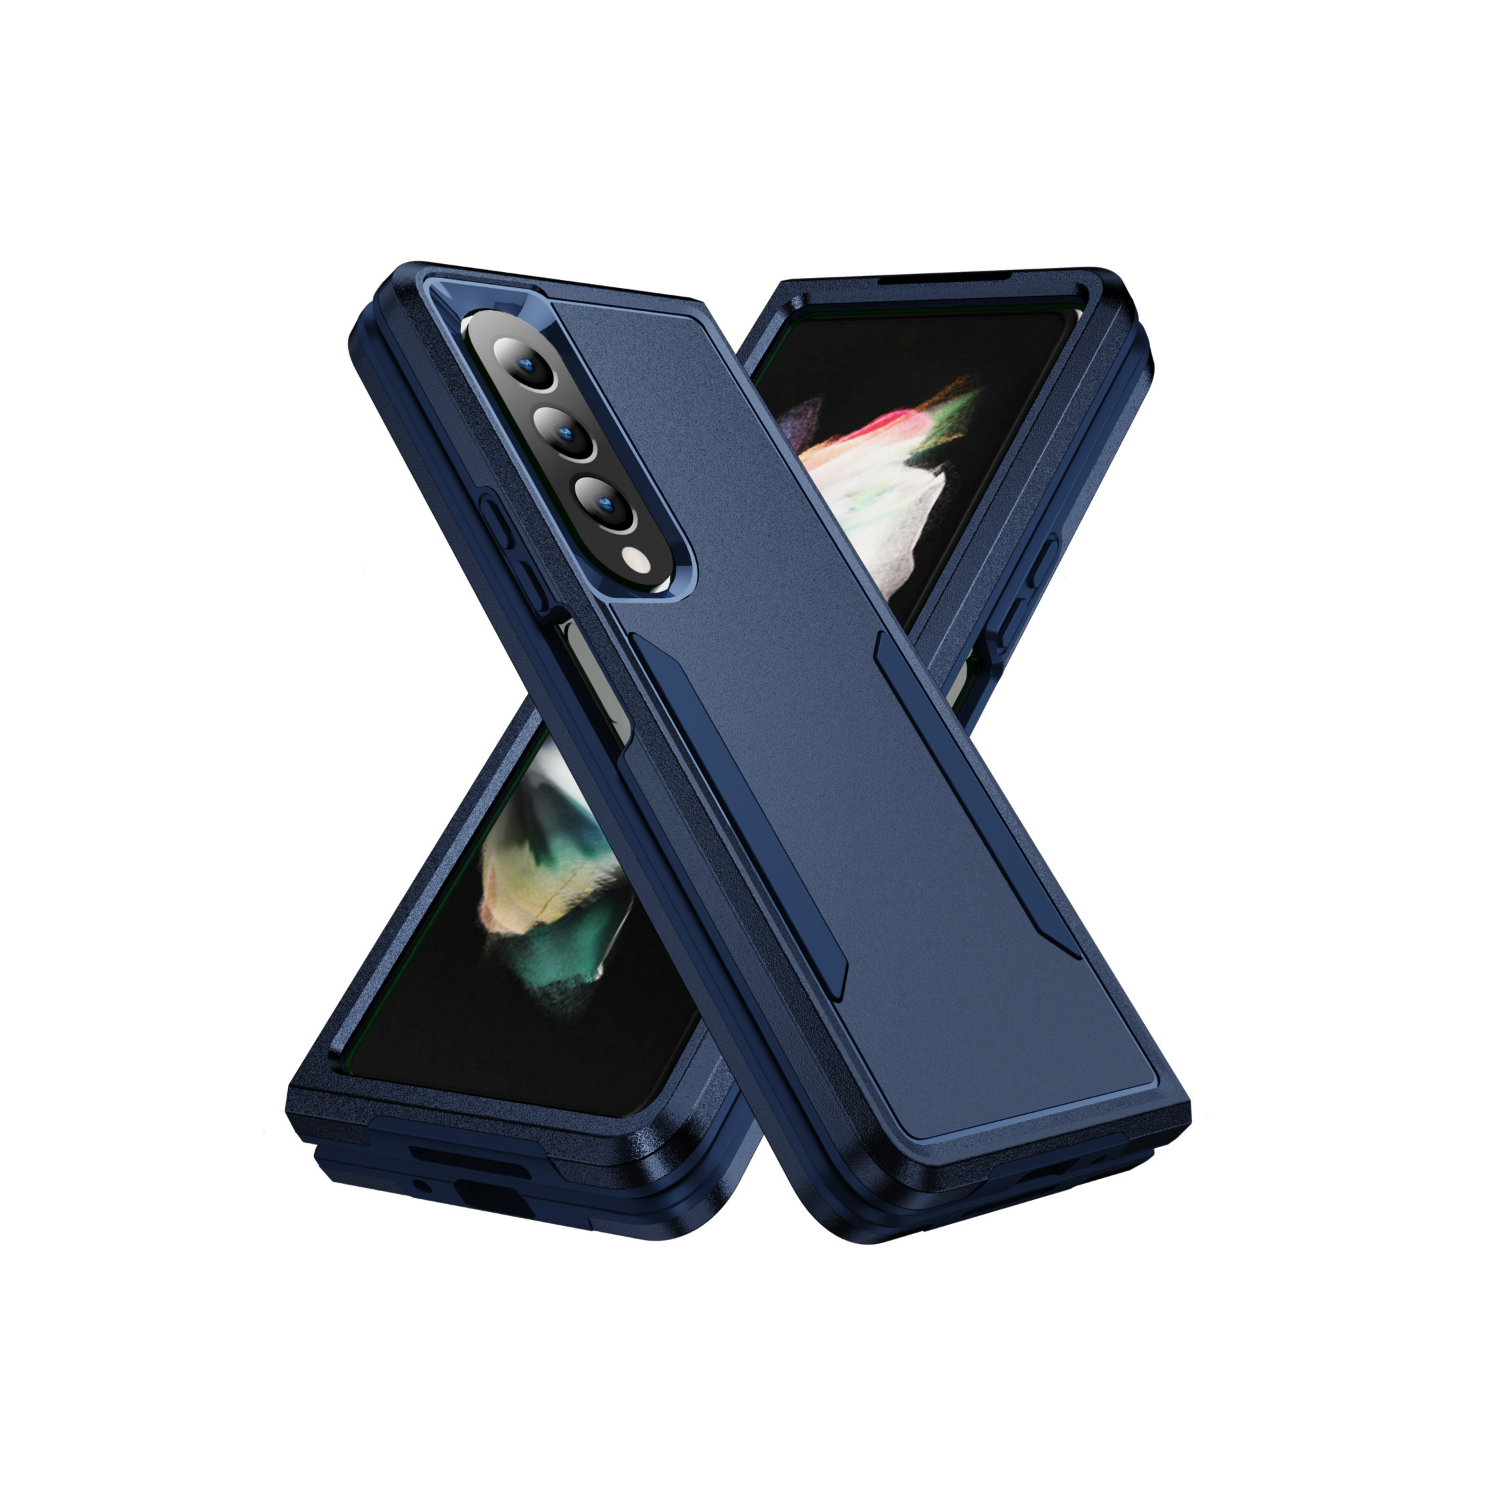 【CSmart】 Dual Layers Heavy Duty Rubber Armor Bumper Hard Case Cover for Samsung Galaxy Z Fold 4 5G, Navy